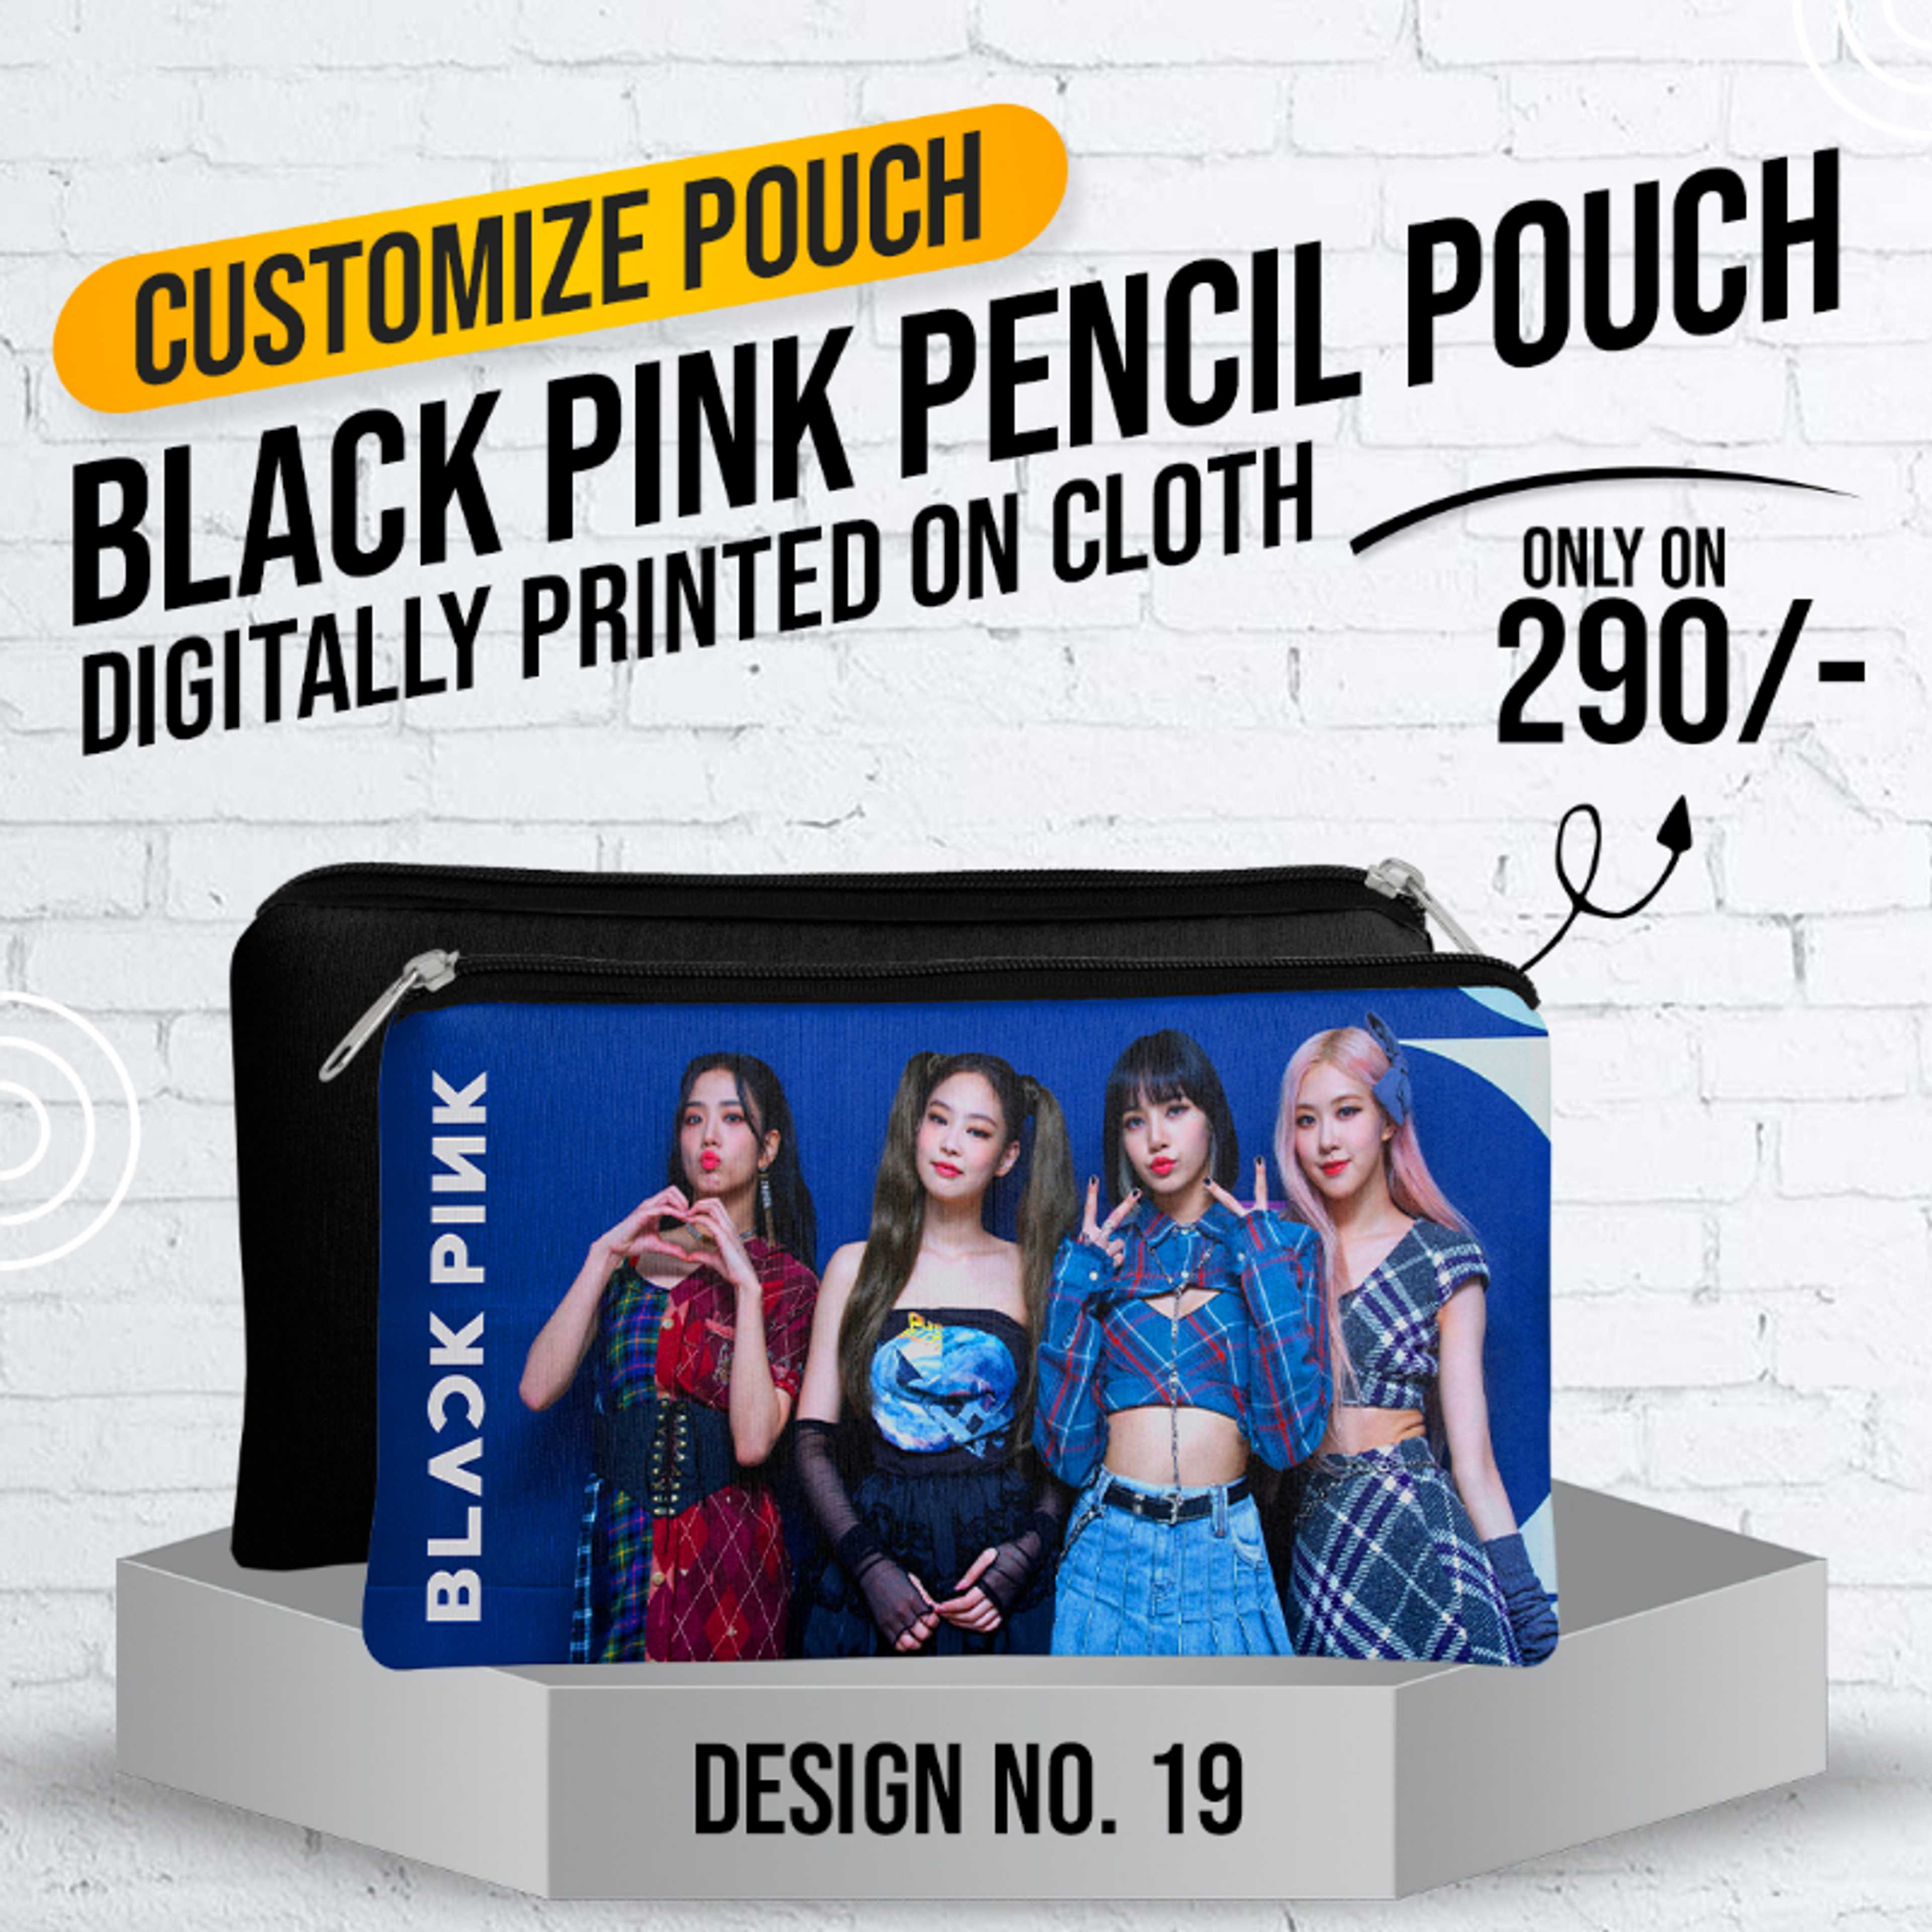 Black Pink Pencil Pouch (Digitally printed on Cloth) D-19